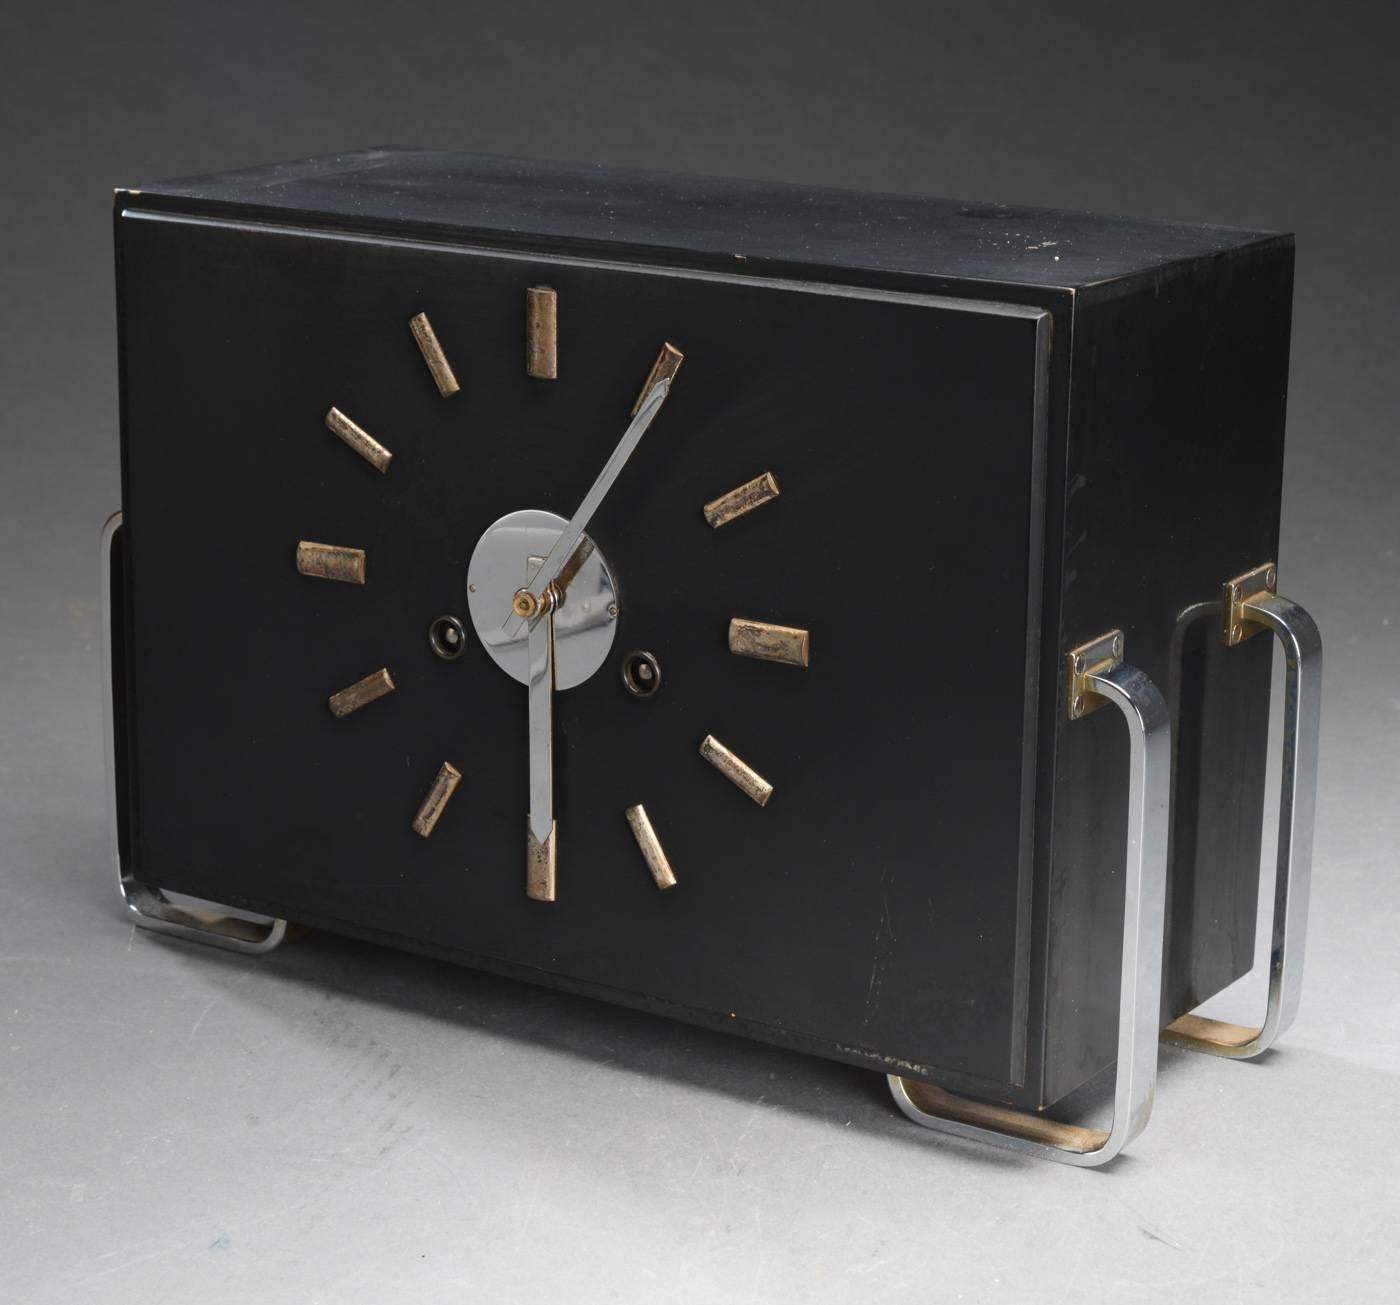 Ebonized softwood box with mechanical movement, made in the middle of the 1930s by Junghans in Germany.